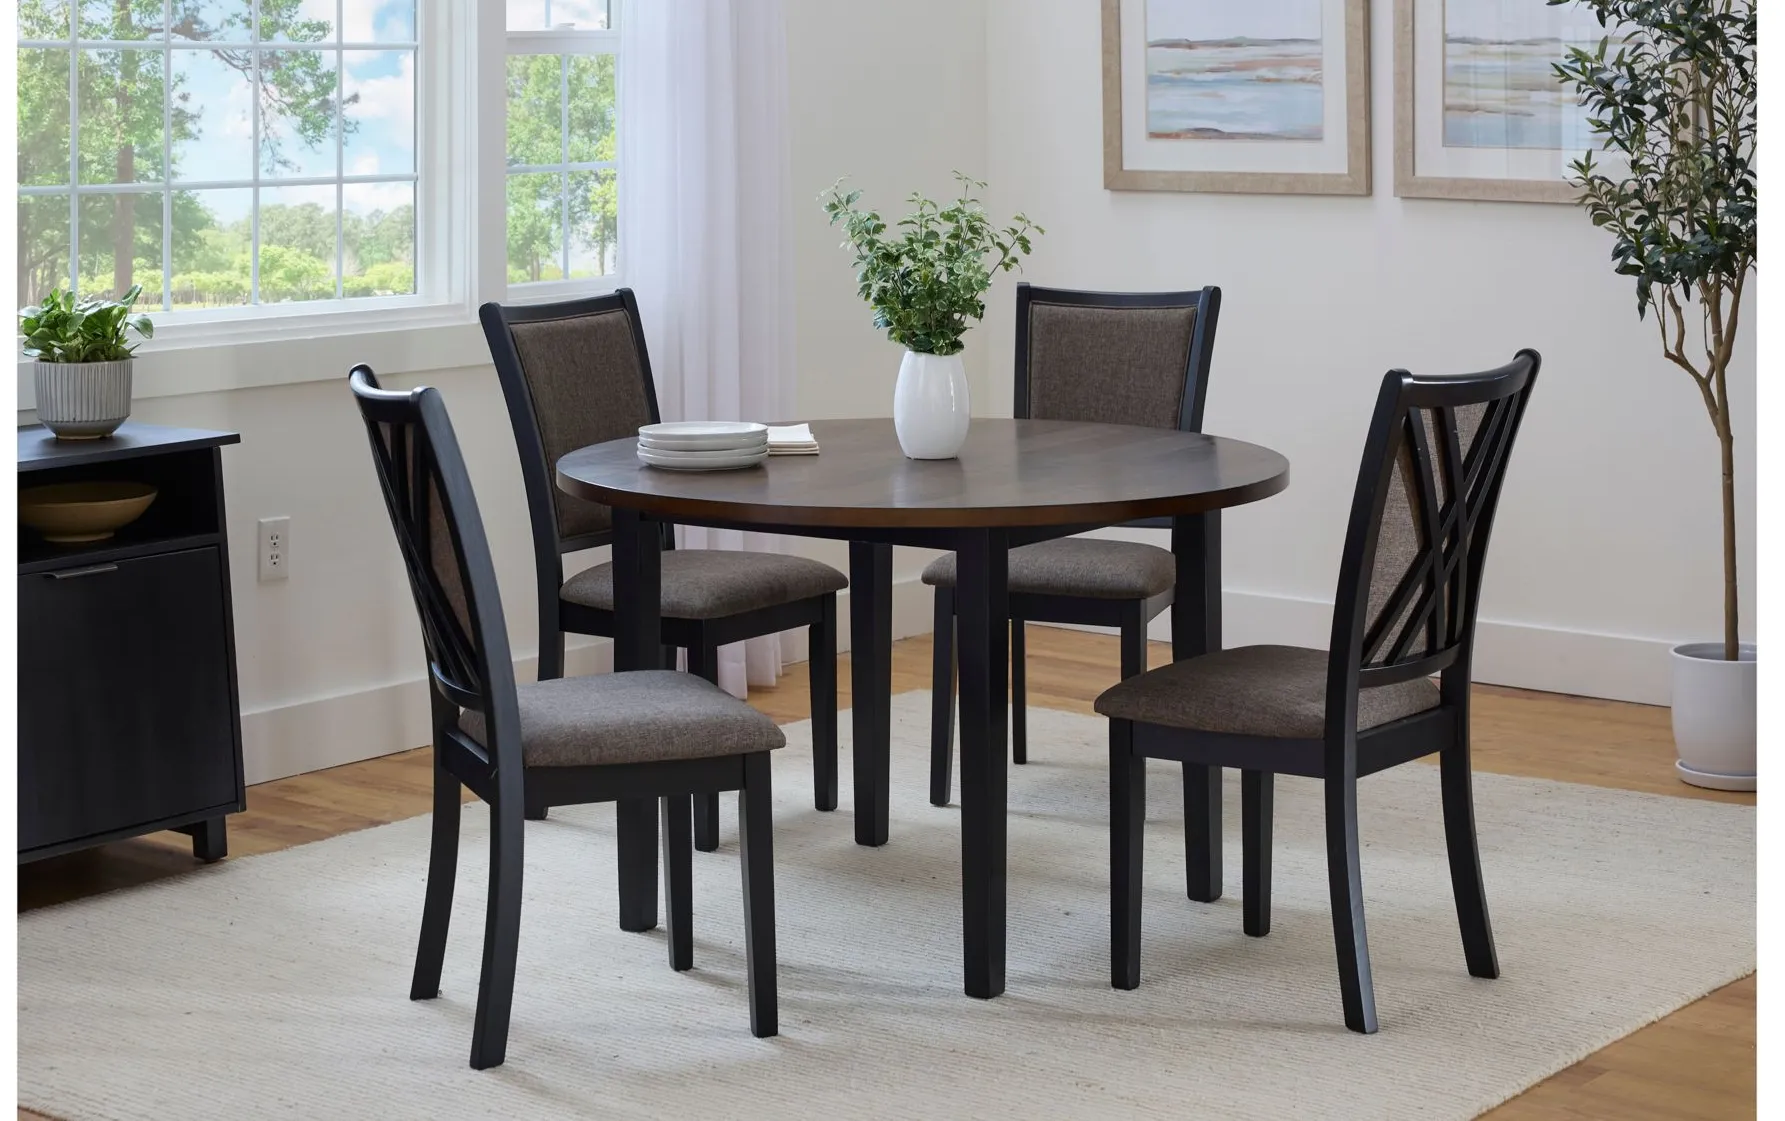 Albert 5-pc. Dining Set in Brown, Black by New Classic Home Furnishings